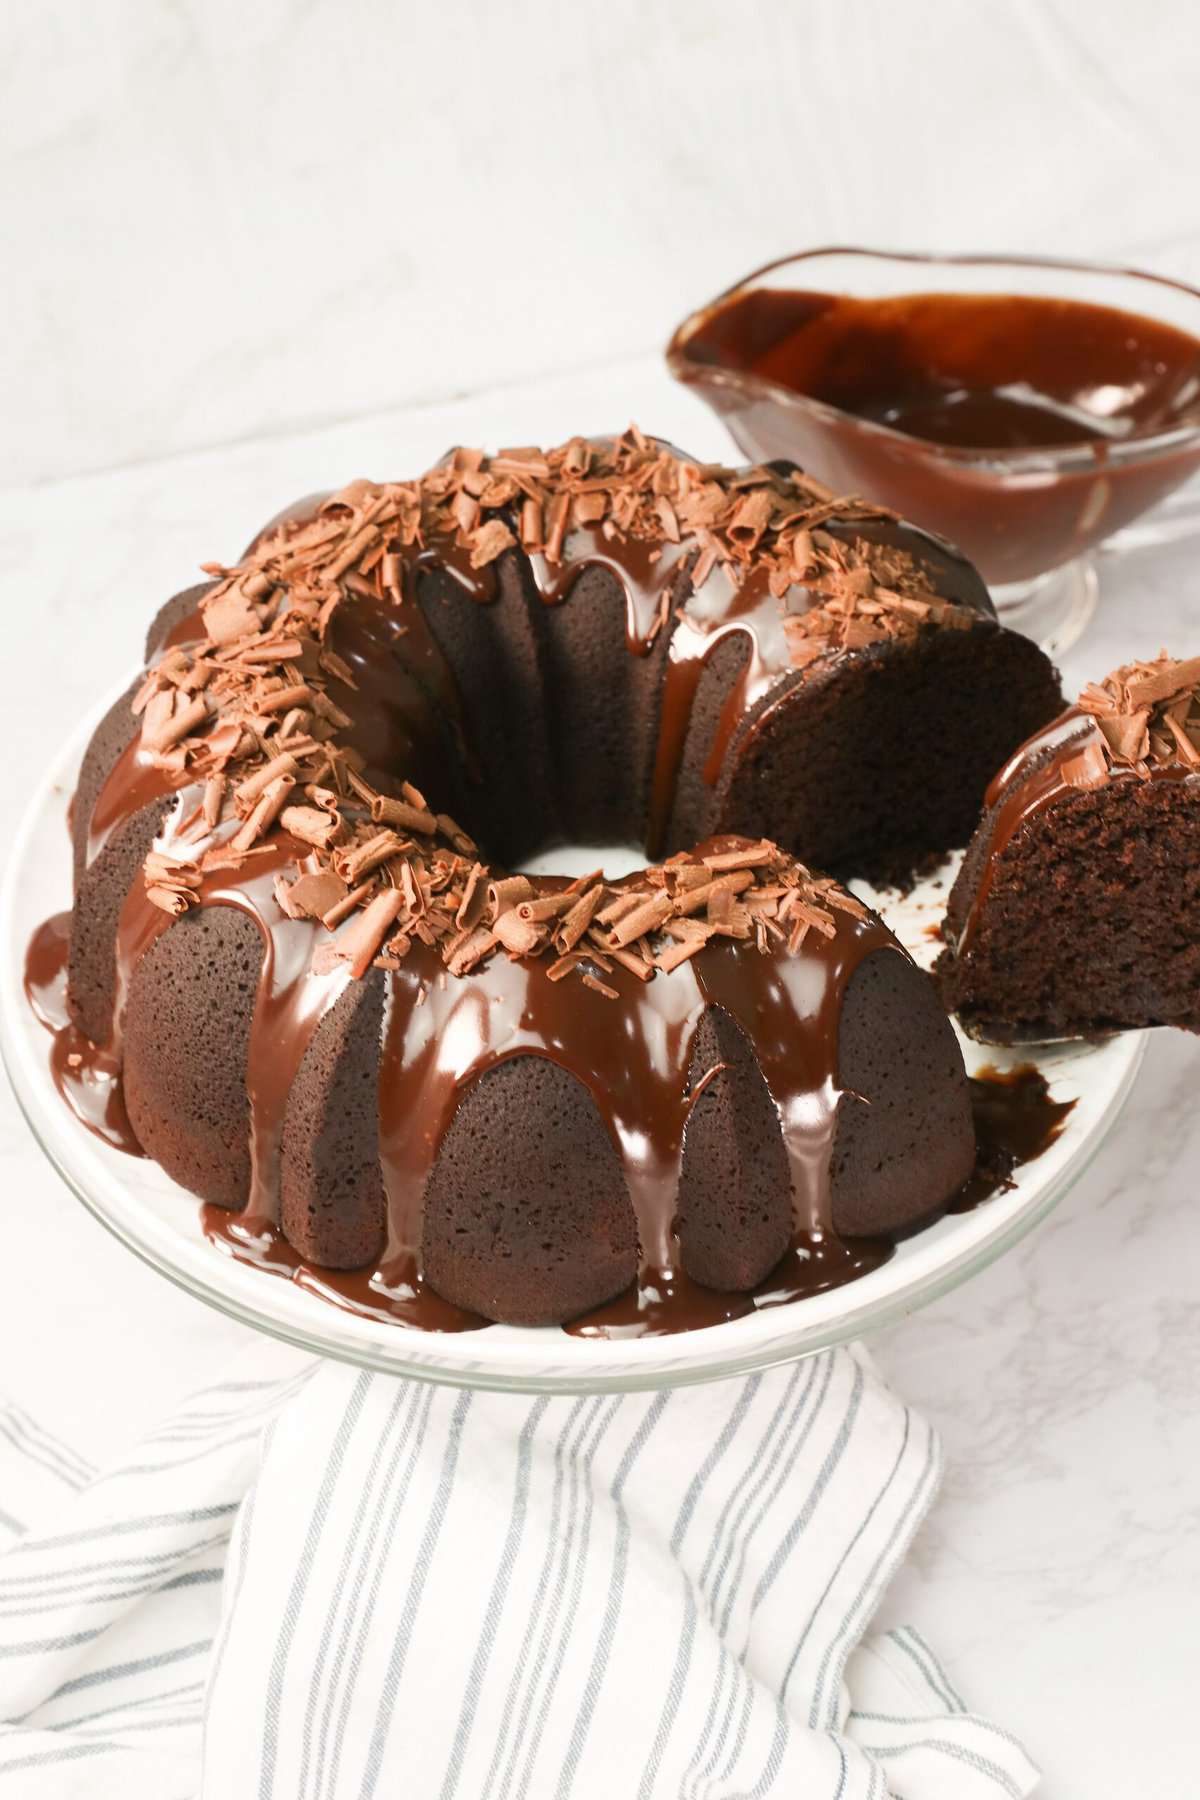 Slicing into an insanely decadent chocolate bundt cake with chocolate ganache drizzled over it and sprinkled with chocolate shavings